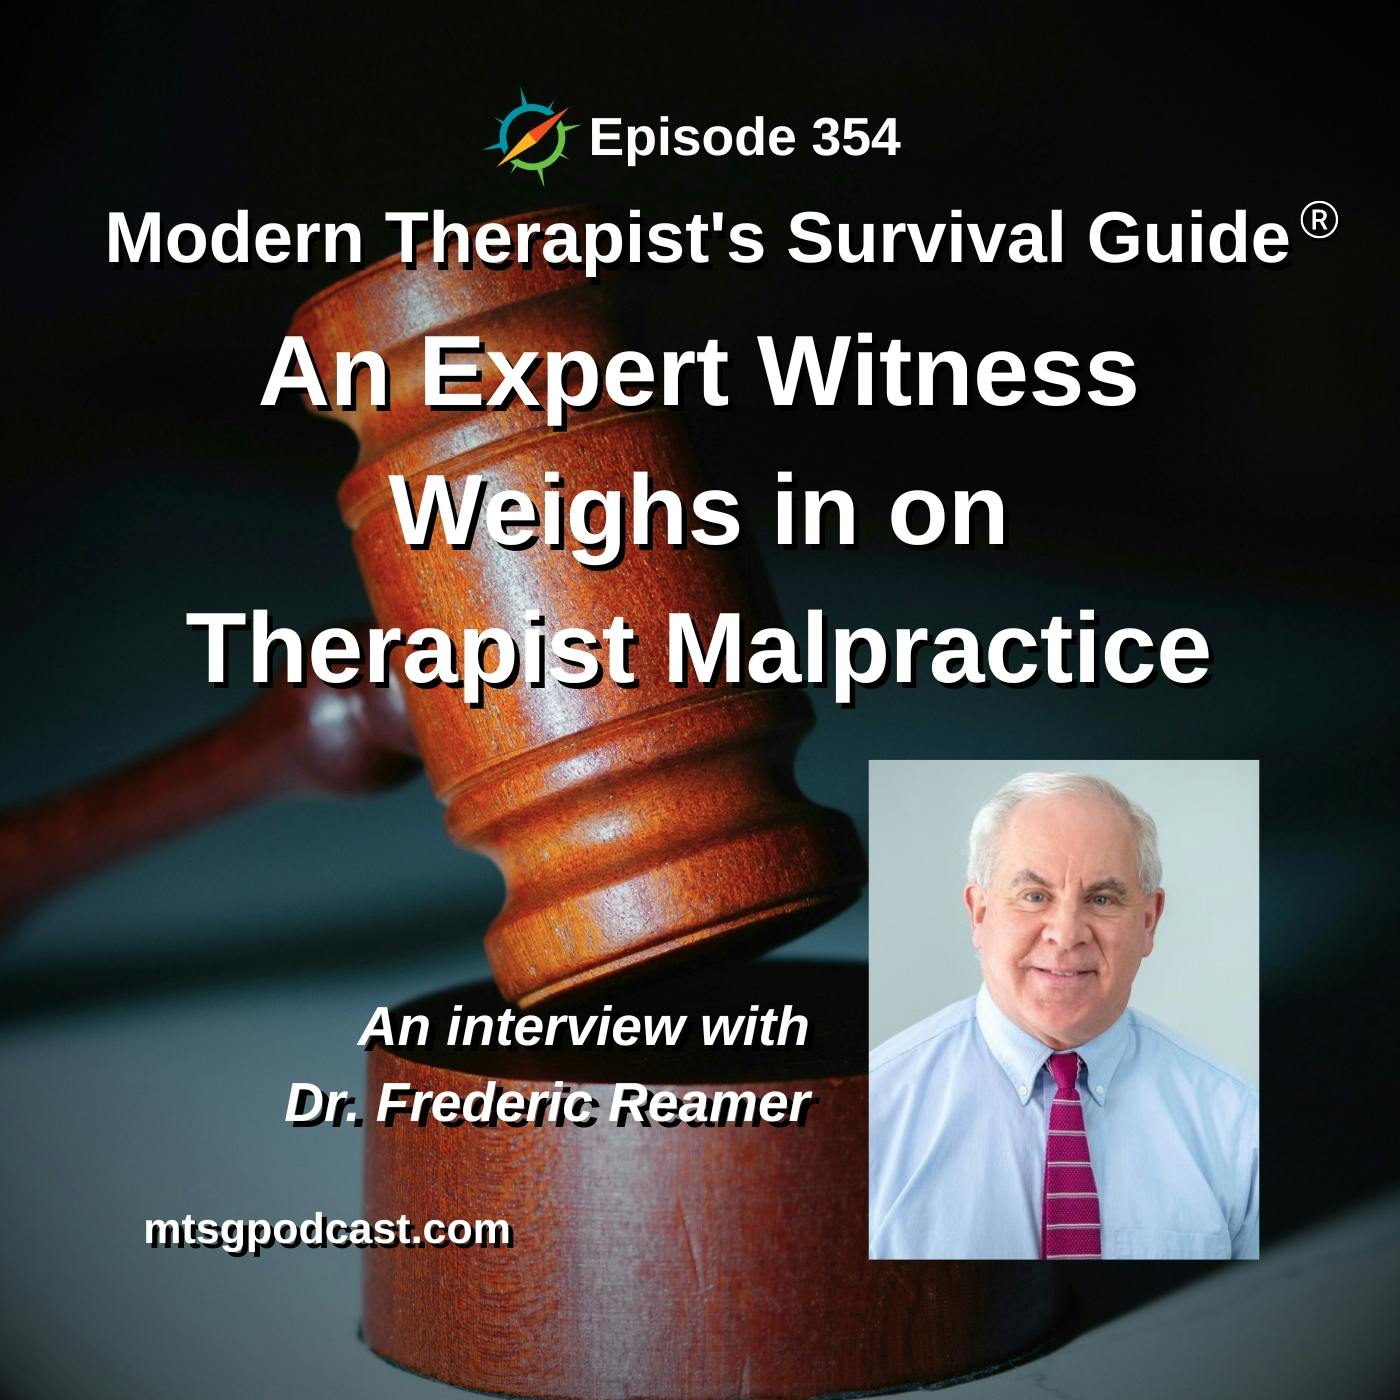 An Expert Witness Weighs in on Therapist Malpractice: An interview with Dr. Frederic Reamer